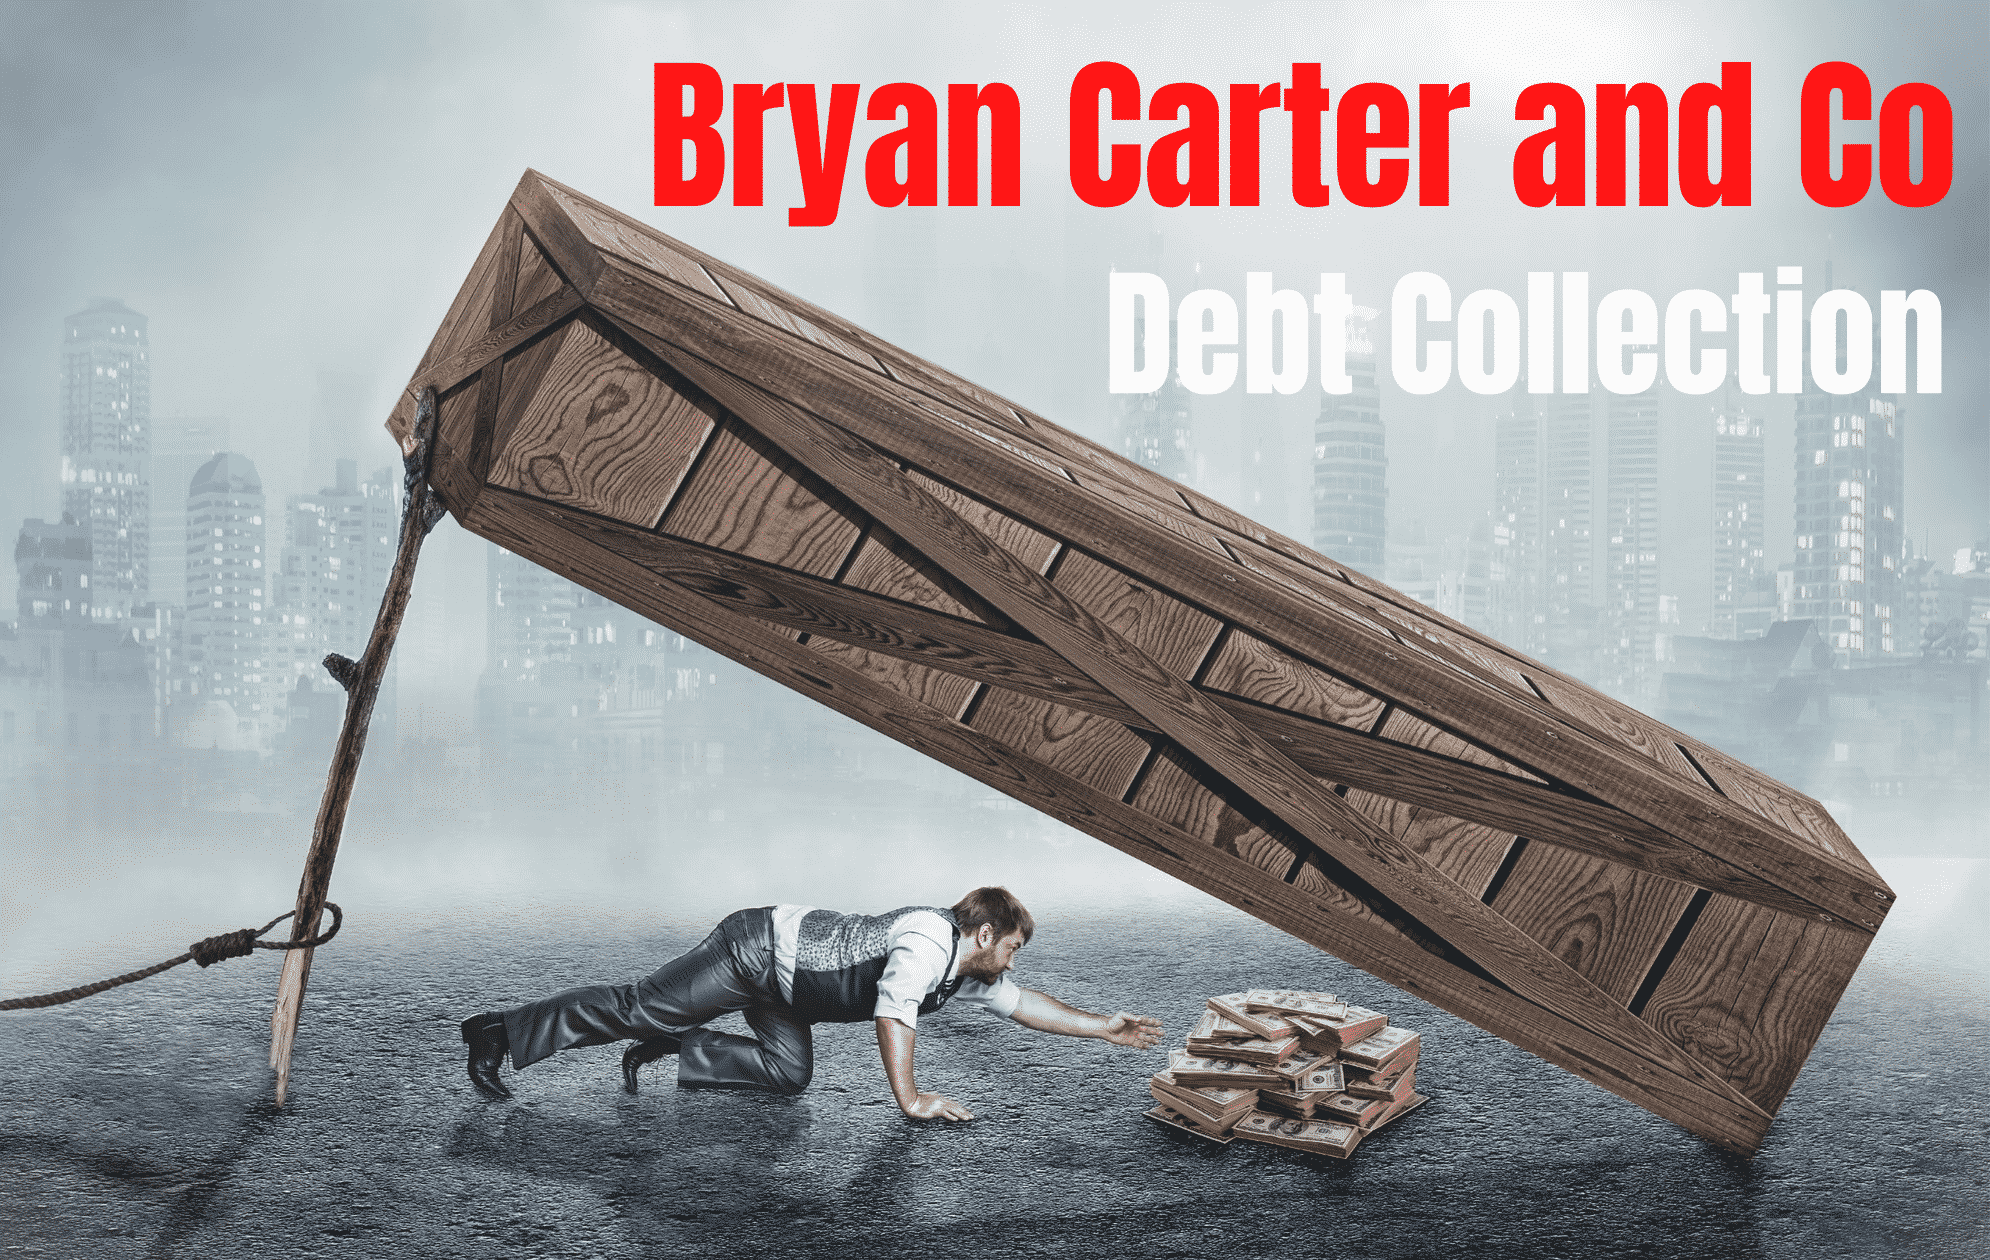 Bryan-carter-and-co-debt-collection